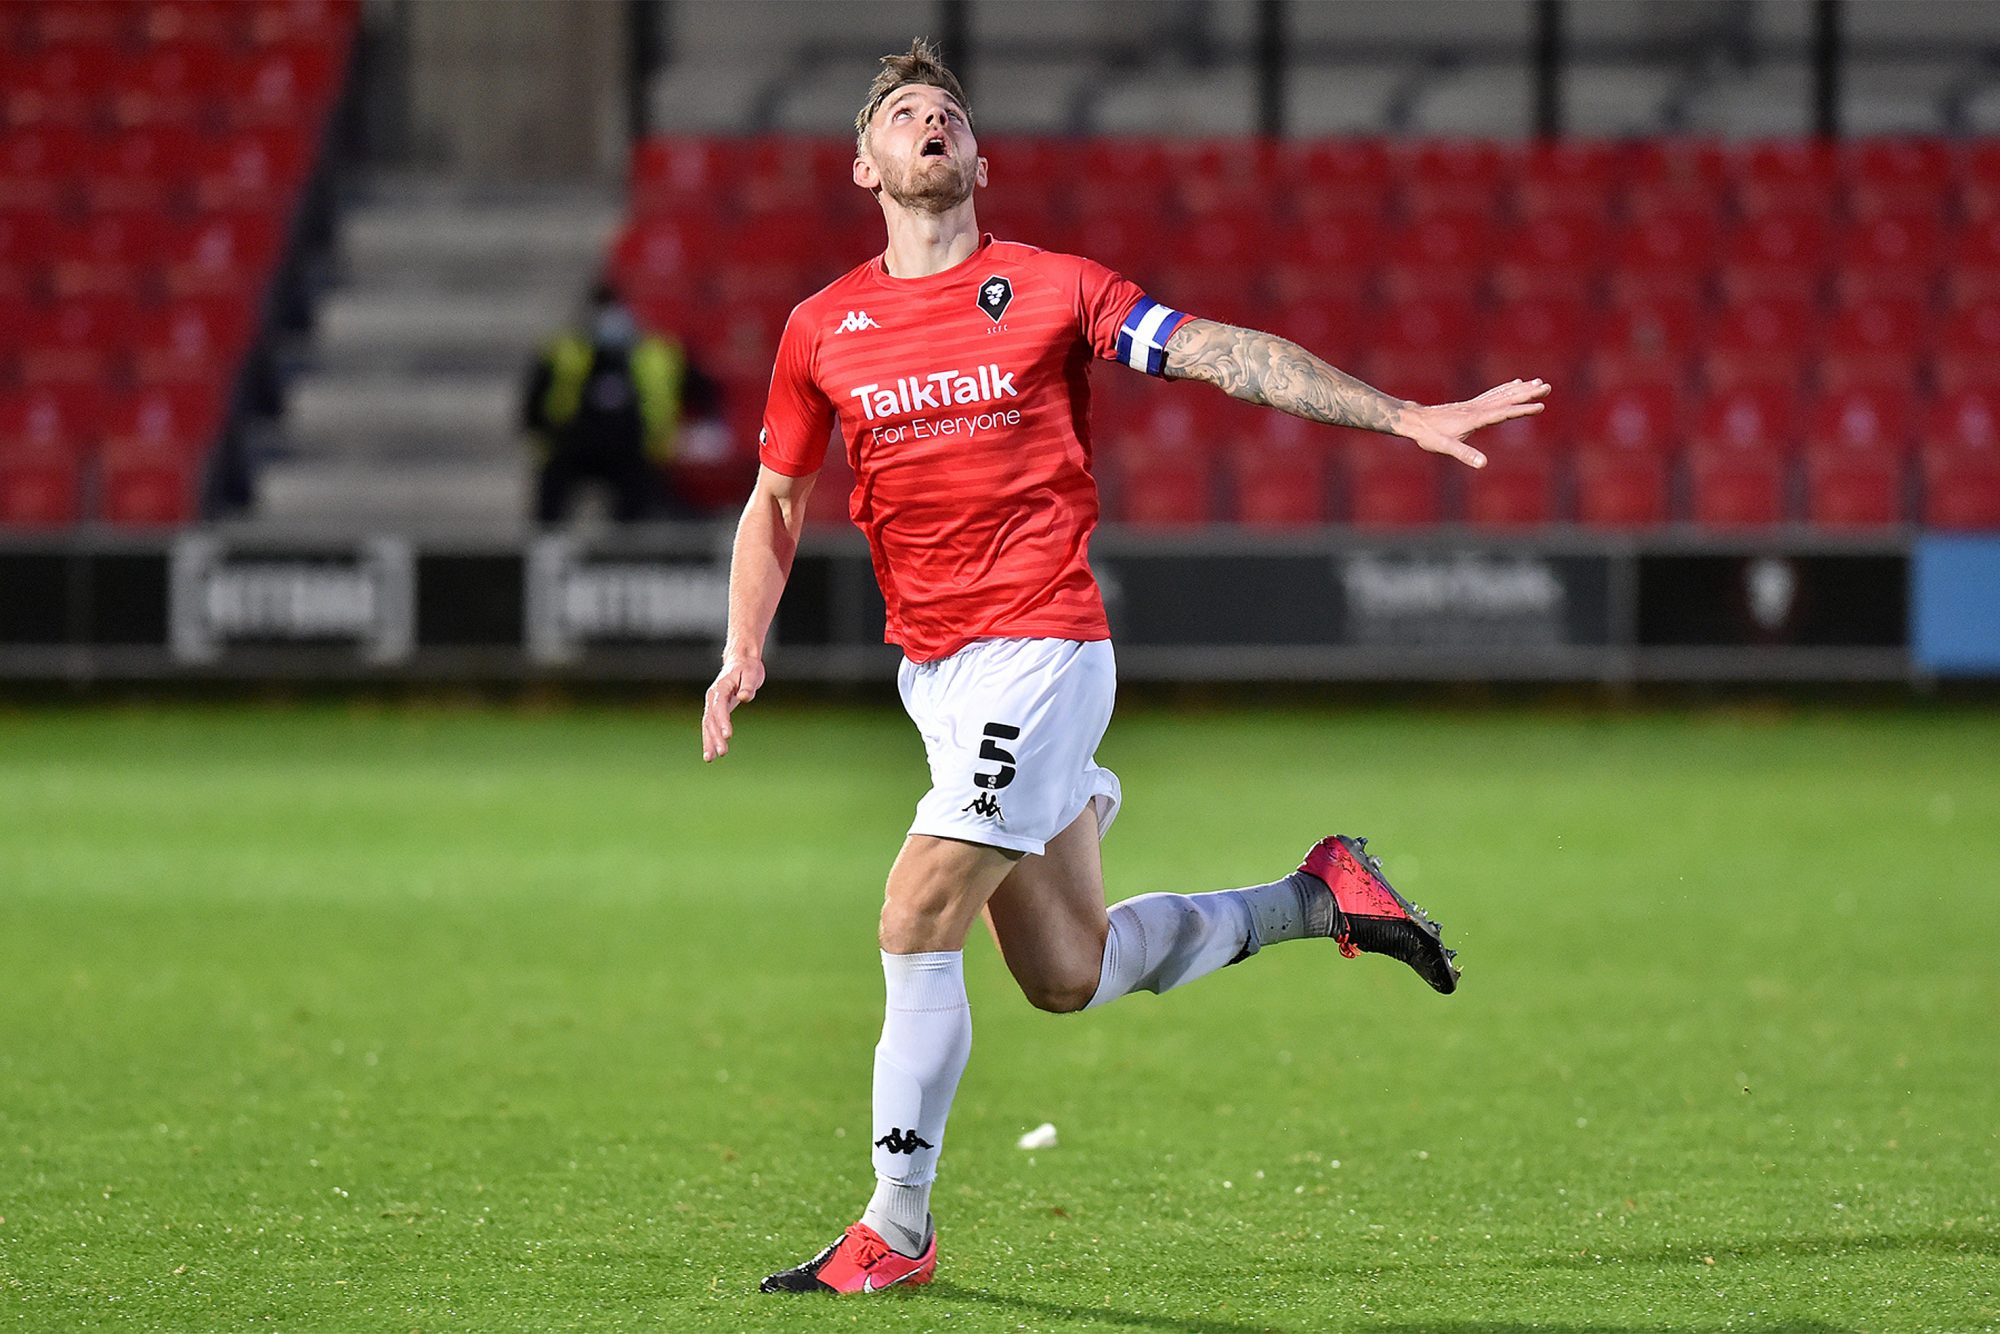 Preview  Hartlepool United (A) - News - Rochdale AFC